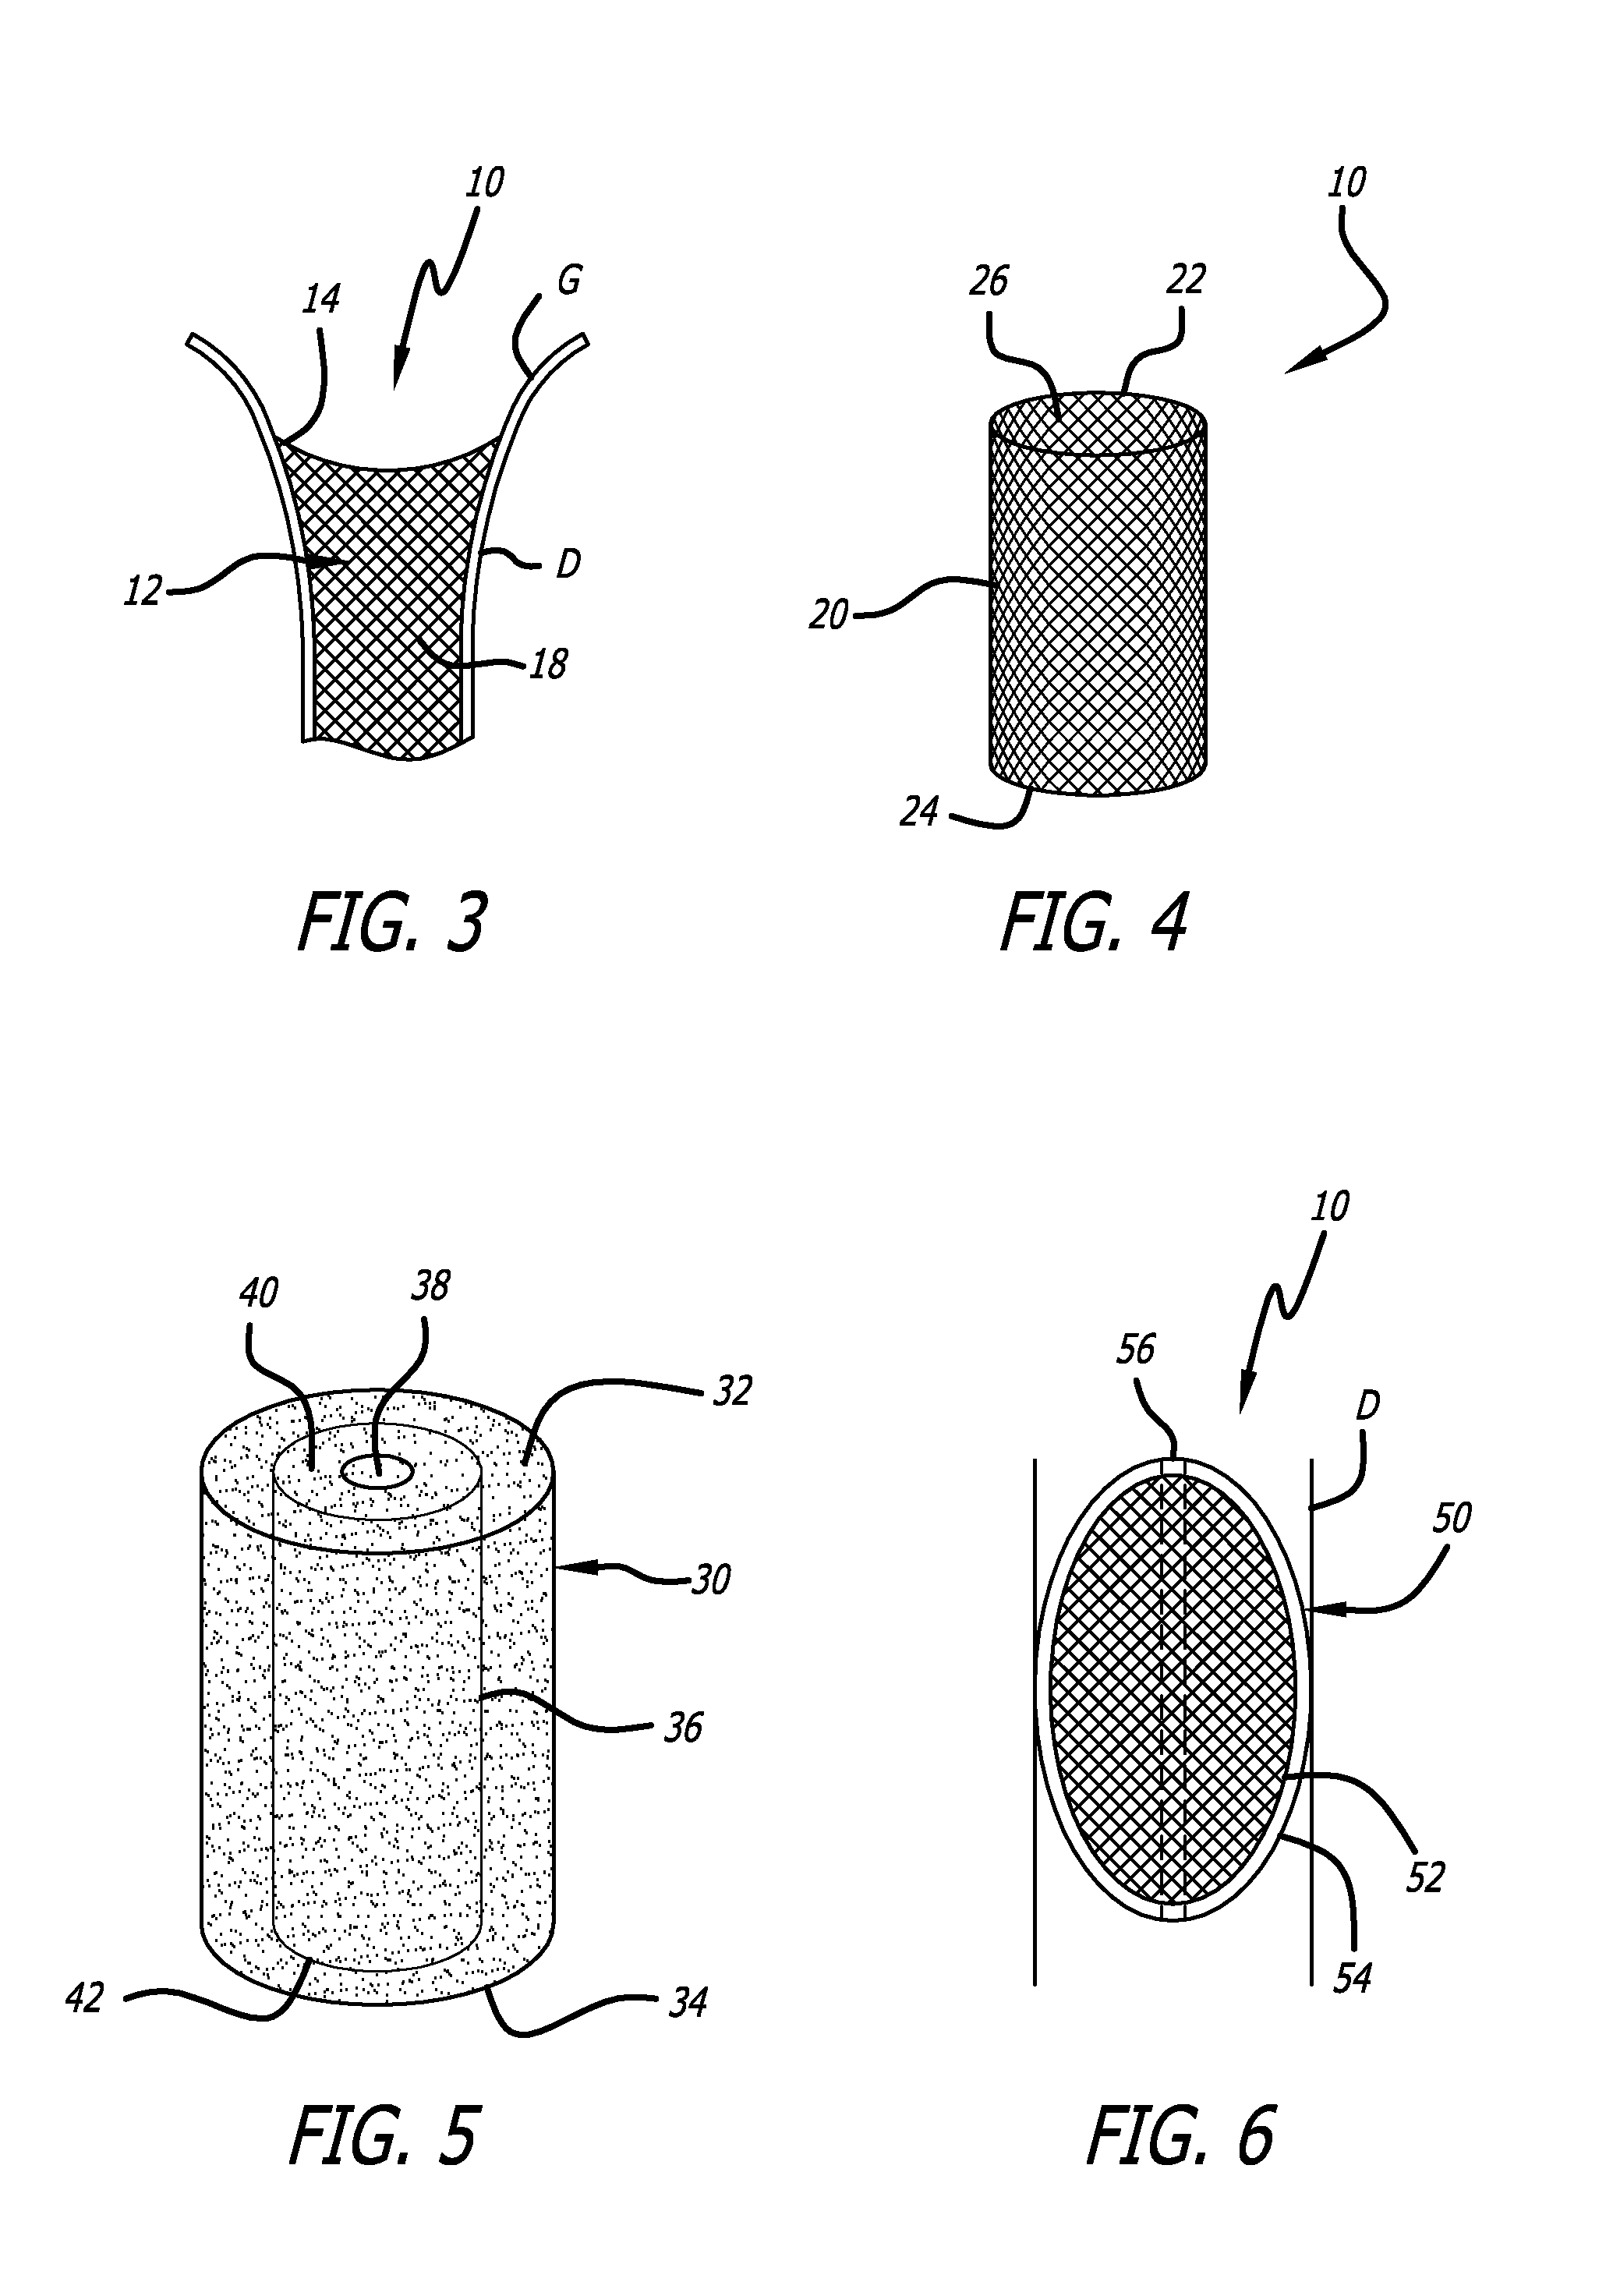 Method and Apparatus For Occluding A Lumen